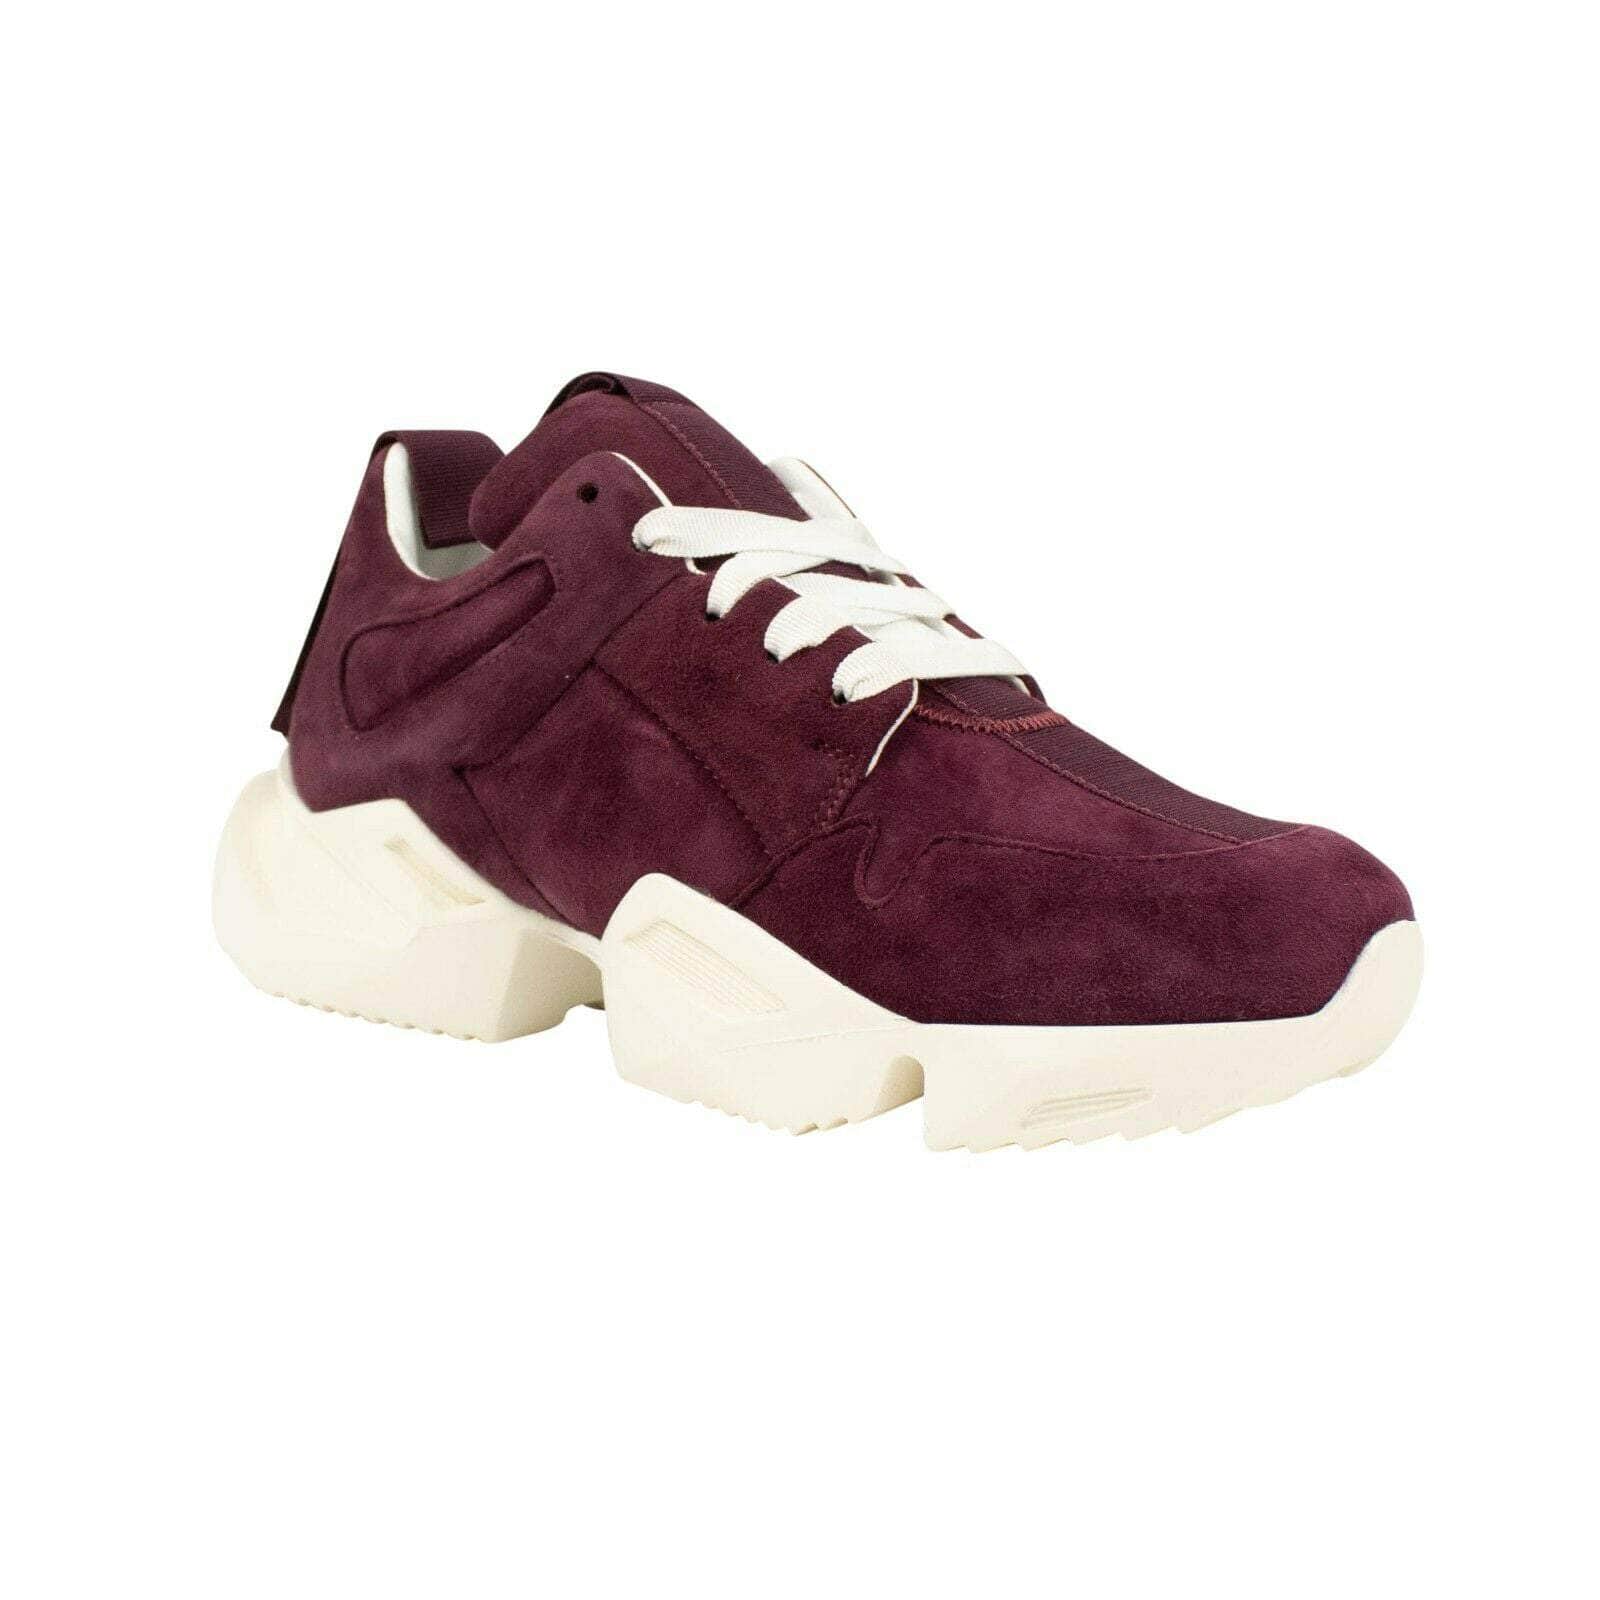 Unravel Project channelenable-all, chicmi, couponcollection, gender-womens, main-shoes, size-37, size-40, under-250, unravel-project Purple Suede Cut Out Sneakers